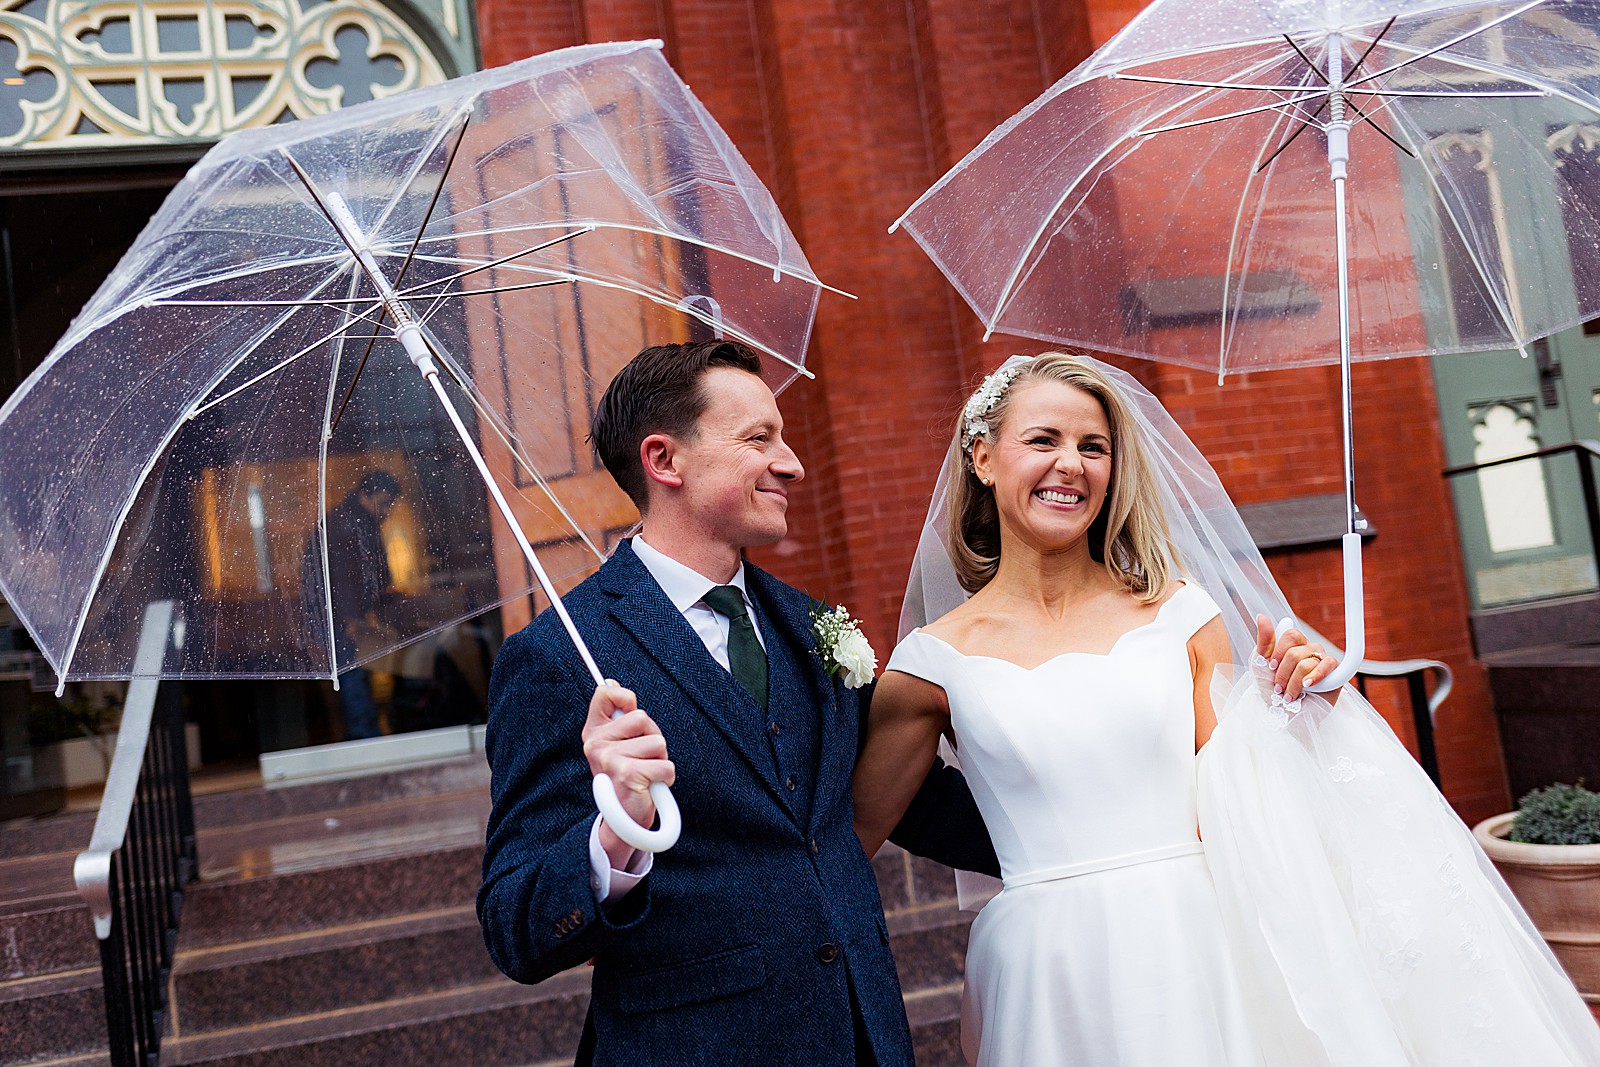 Bride and groom exit the Immaculate Conception church in DC and walk down the stairs with umbrellas in the rain.